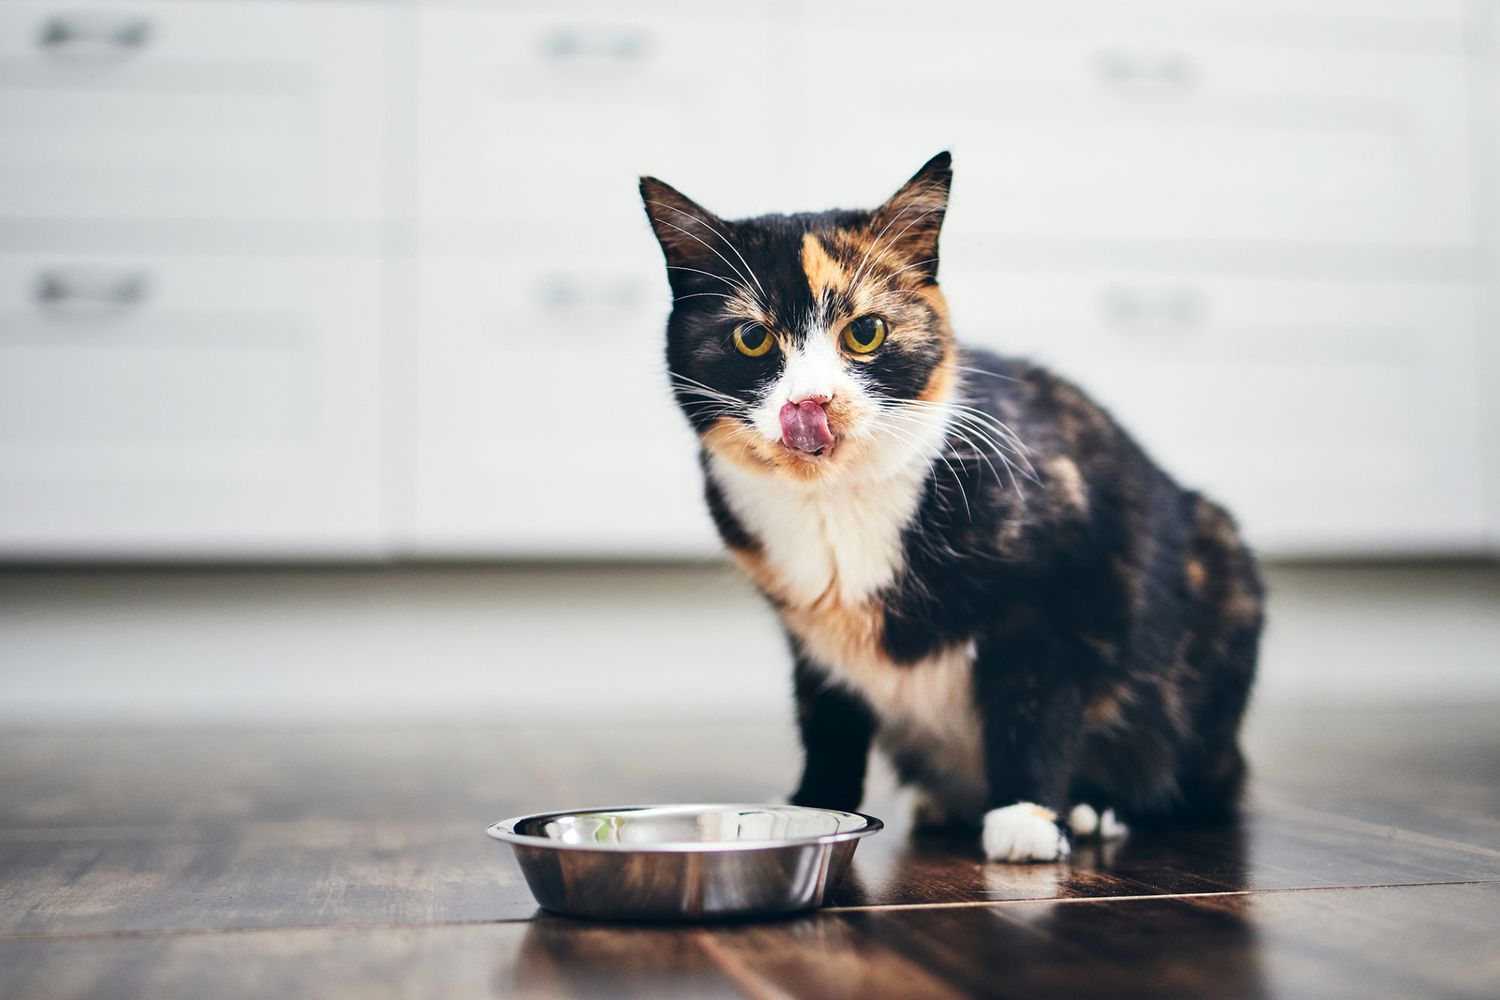 cat licking mouth over bowl